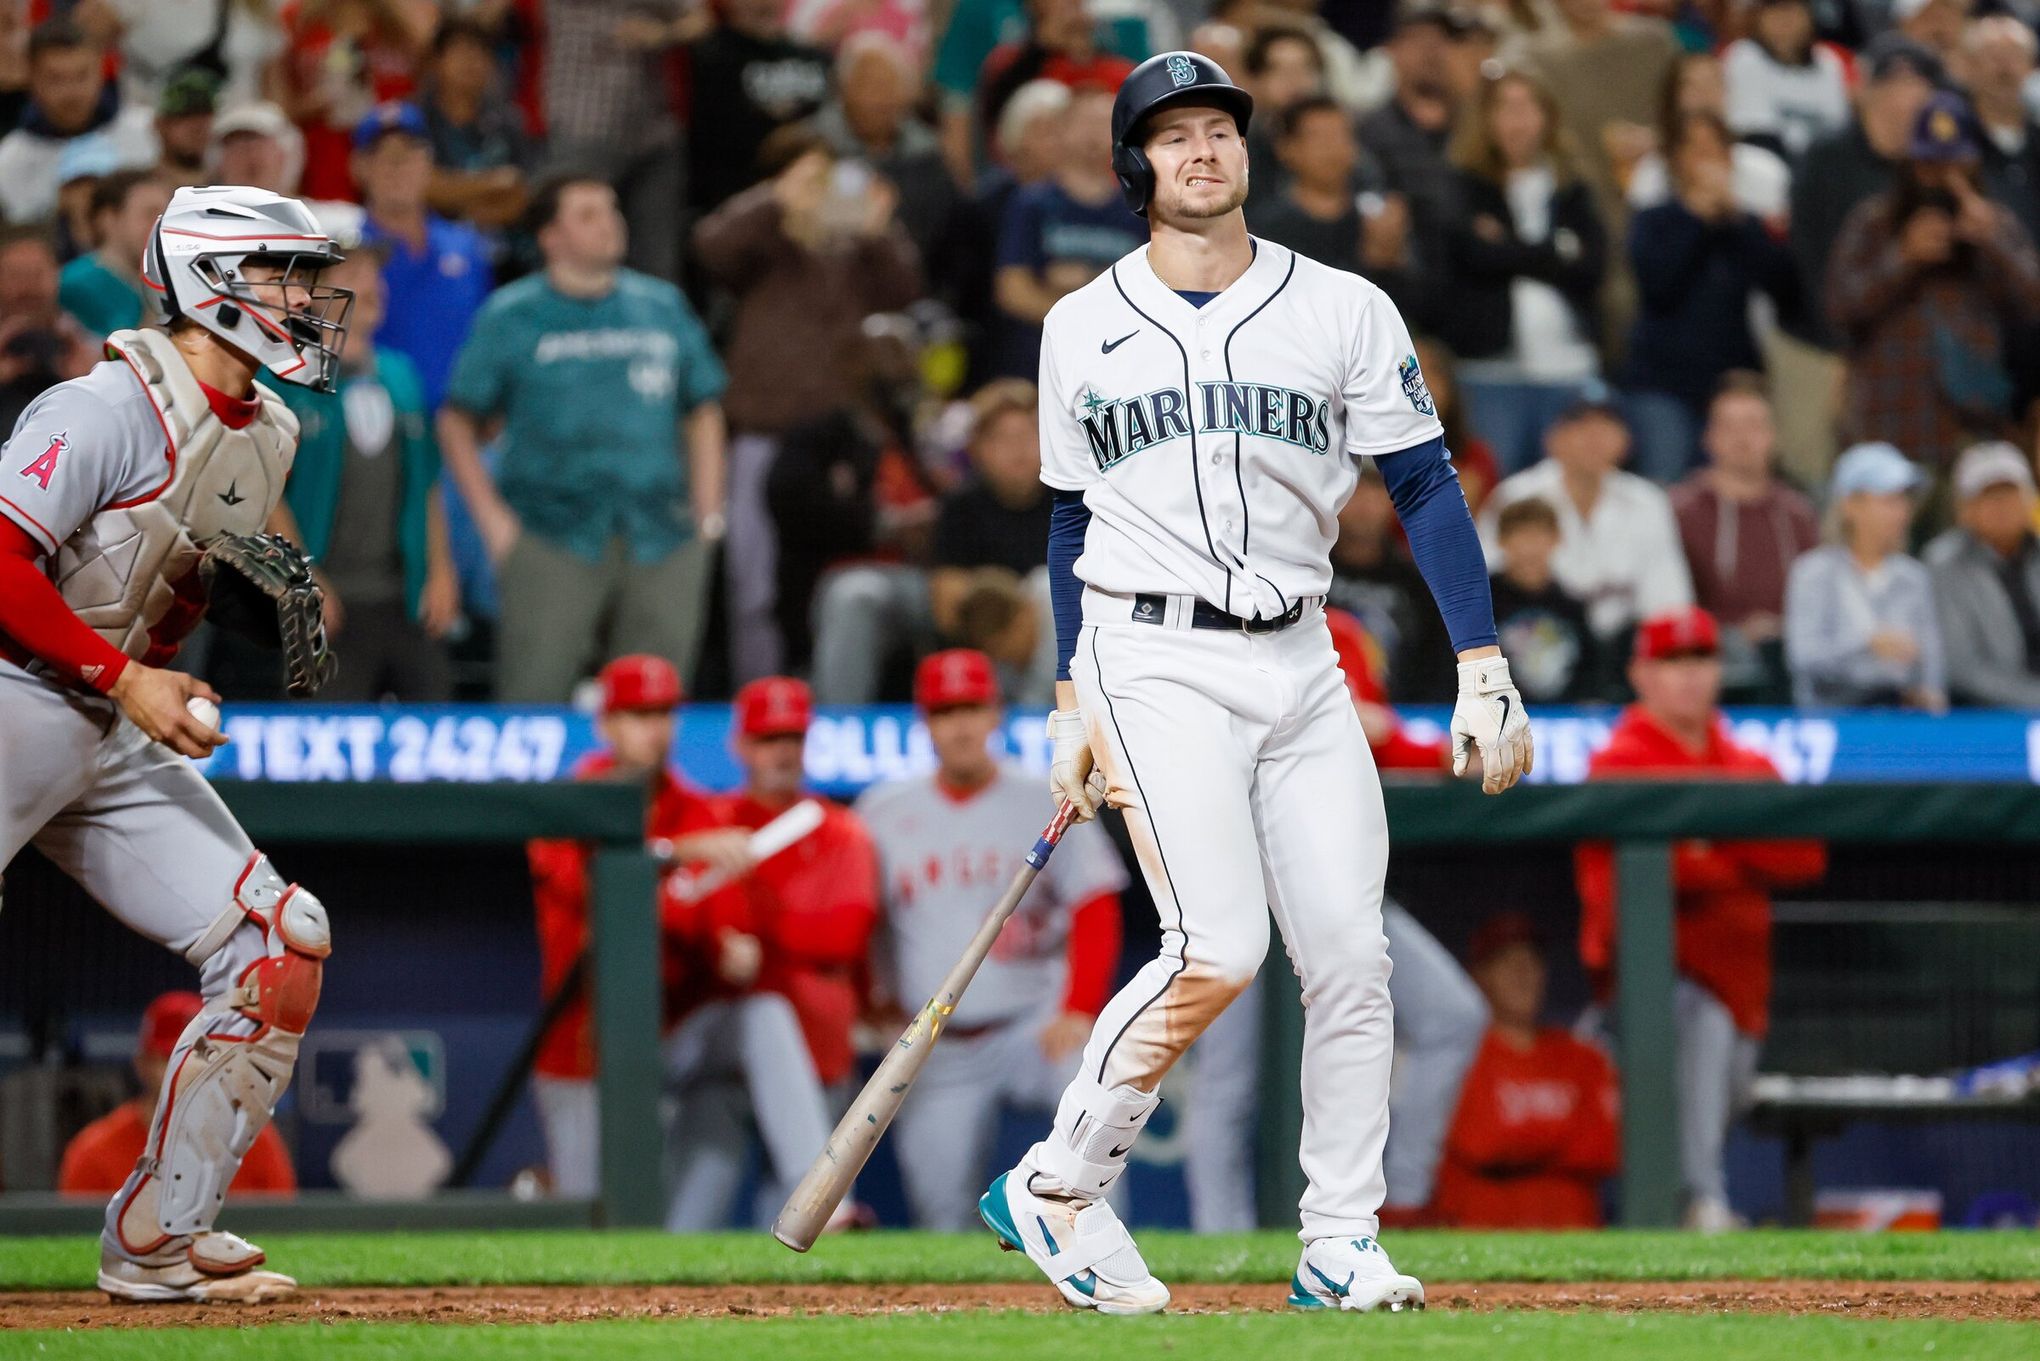 After rough start, Logan Gilbert rights himself to help Mariners beat  Braves